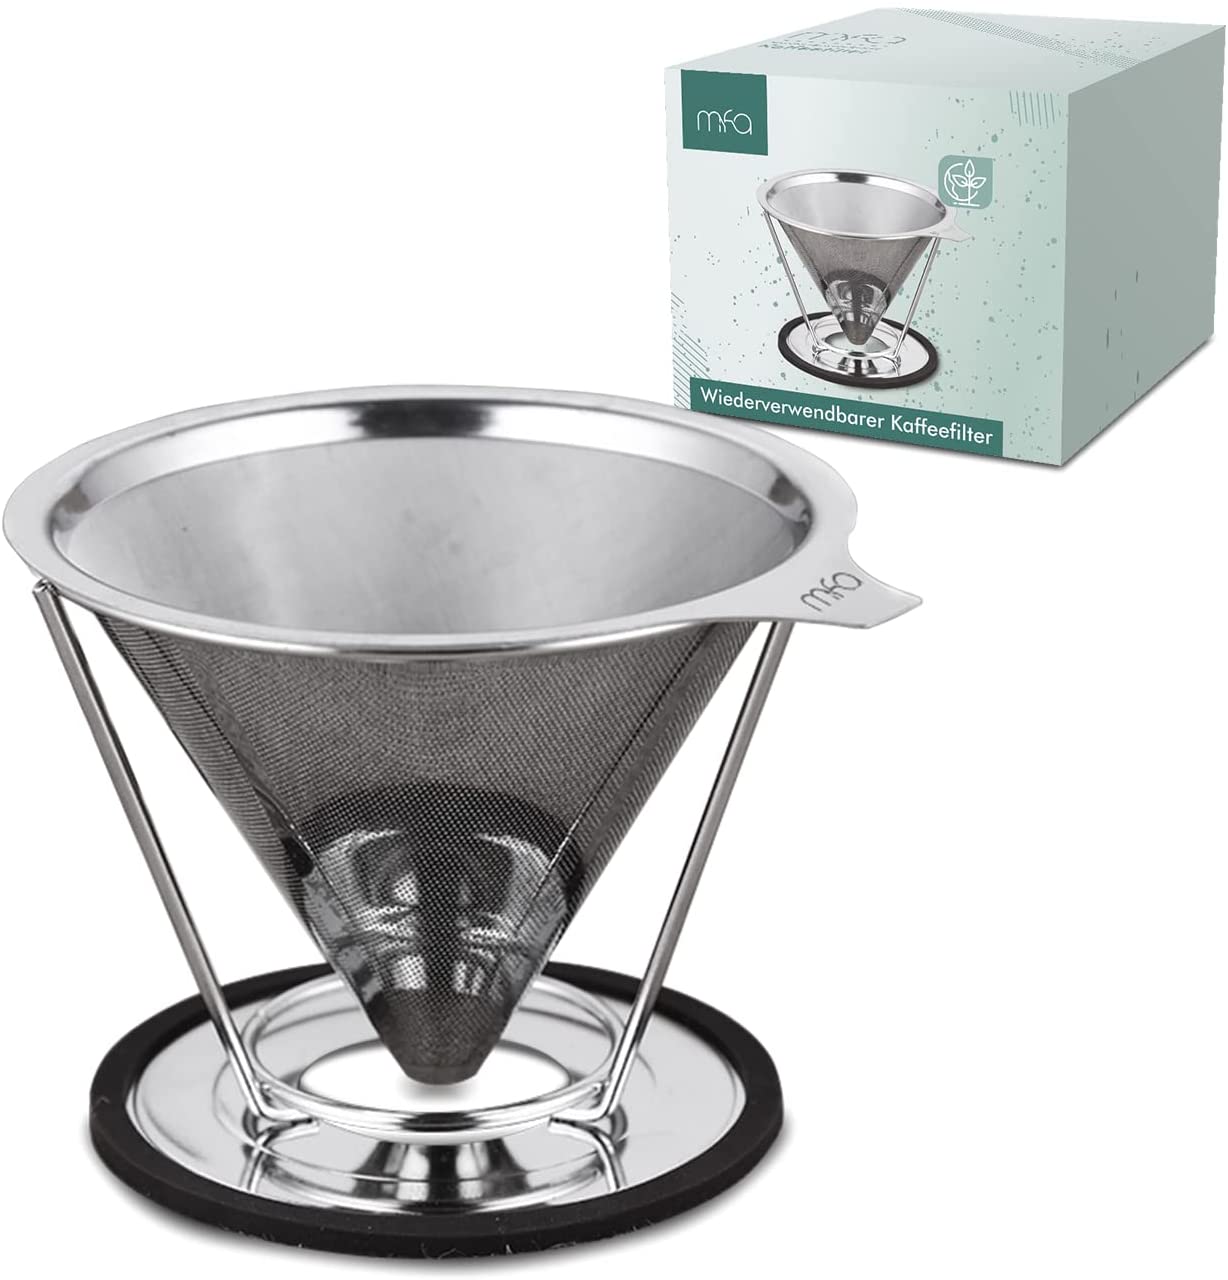 mfa Reusable stainless steel coffee filter, ideal for filter coffee, chemex